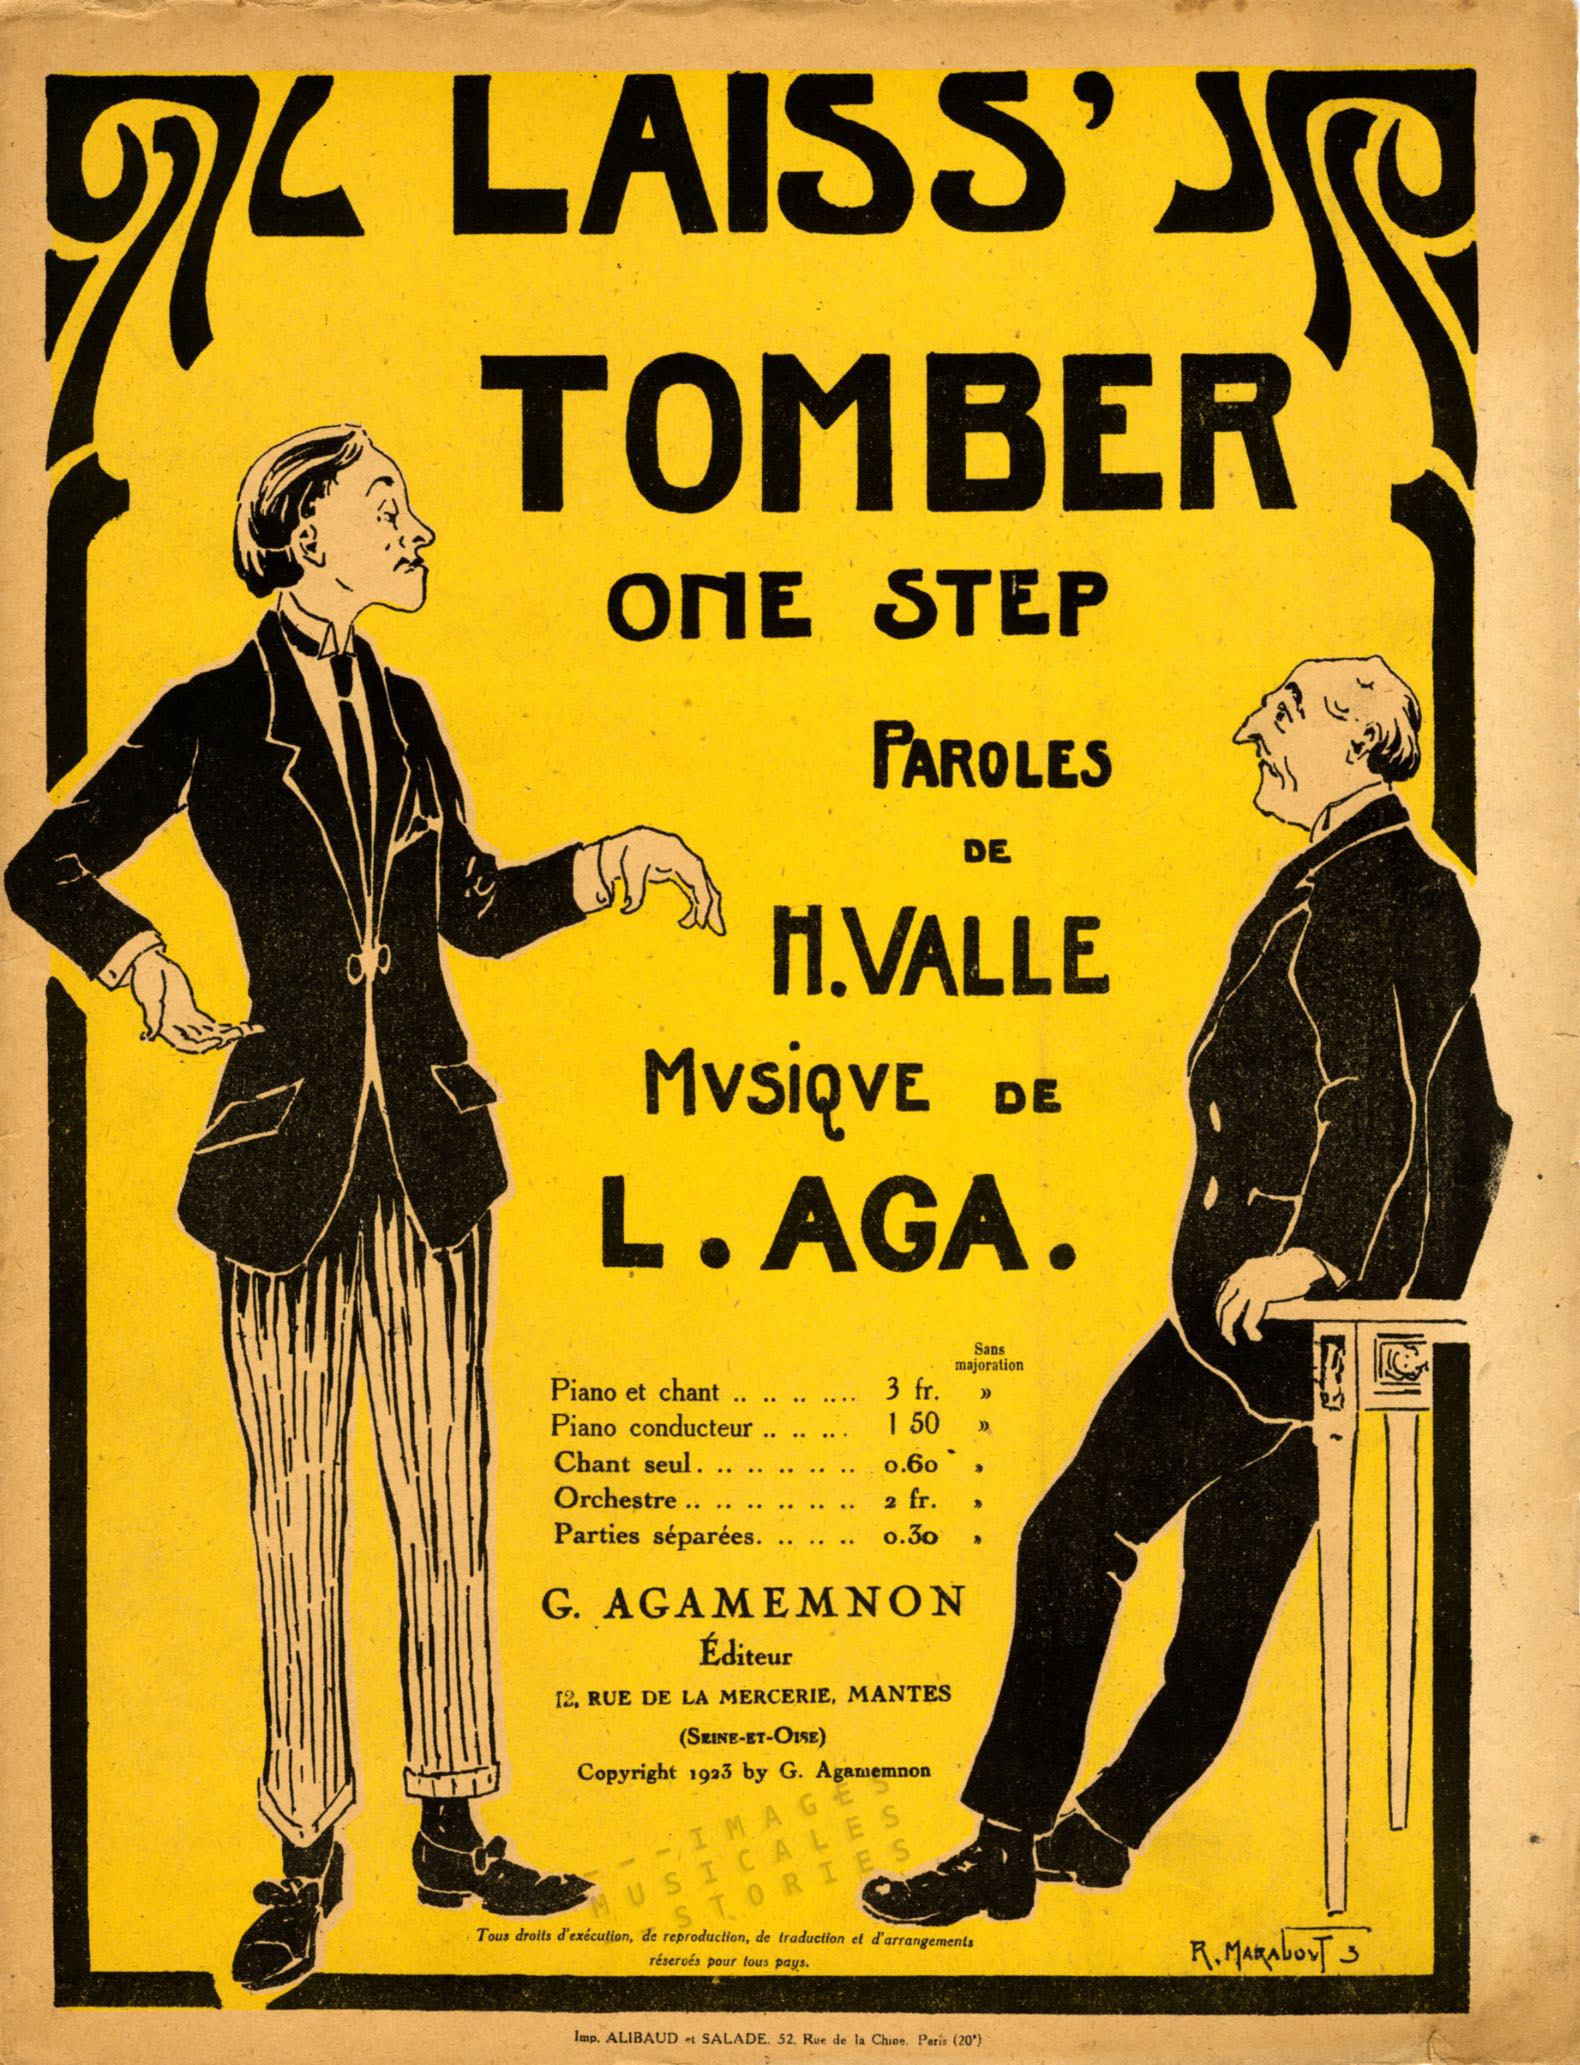 Cover of the sheet music 'Laiss' tomber', one step by L. Aga